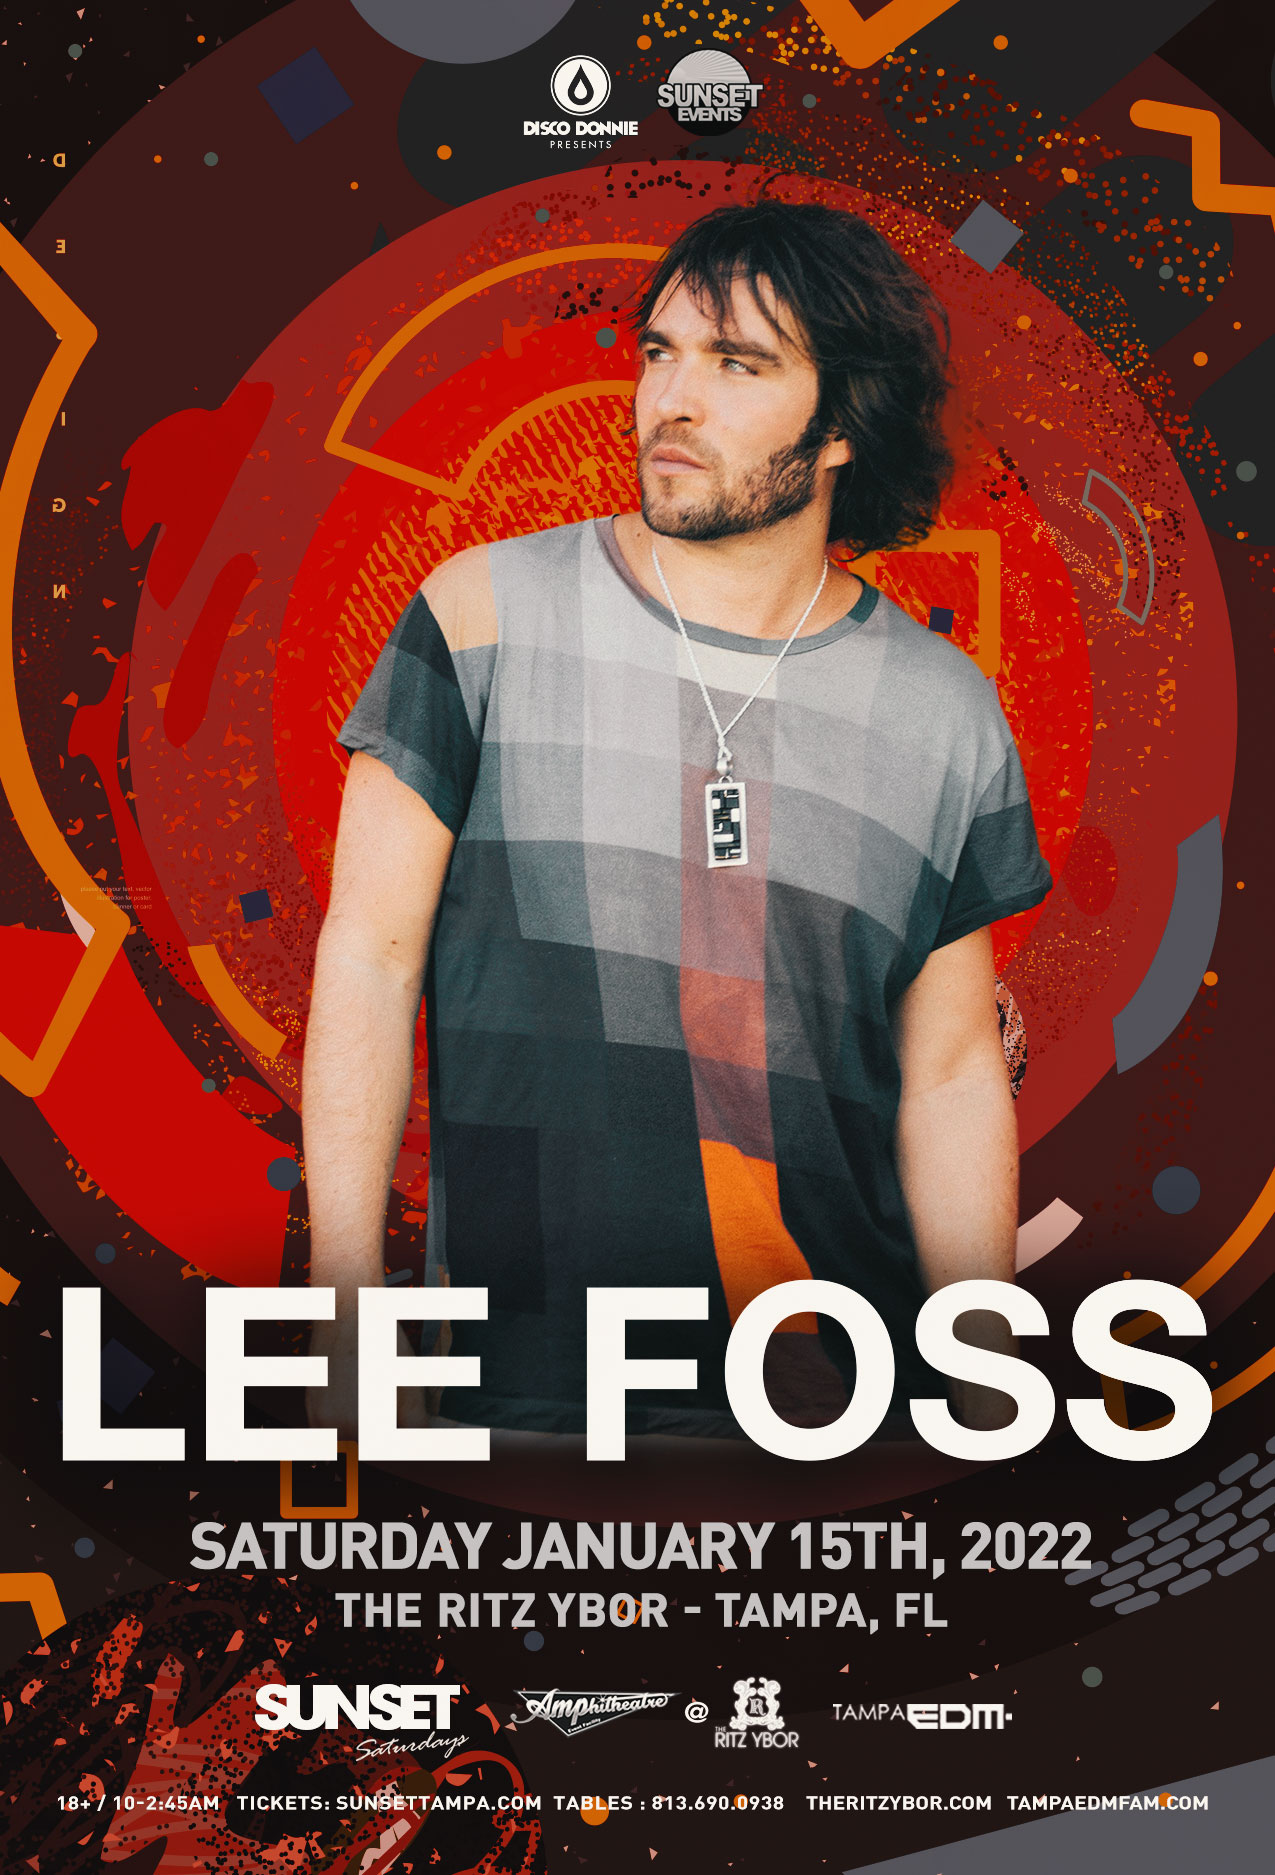 Lee Foss for Sunset Saturdays at The RITZ Ybor – 1/15/2022